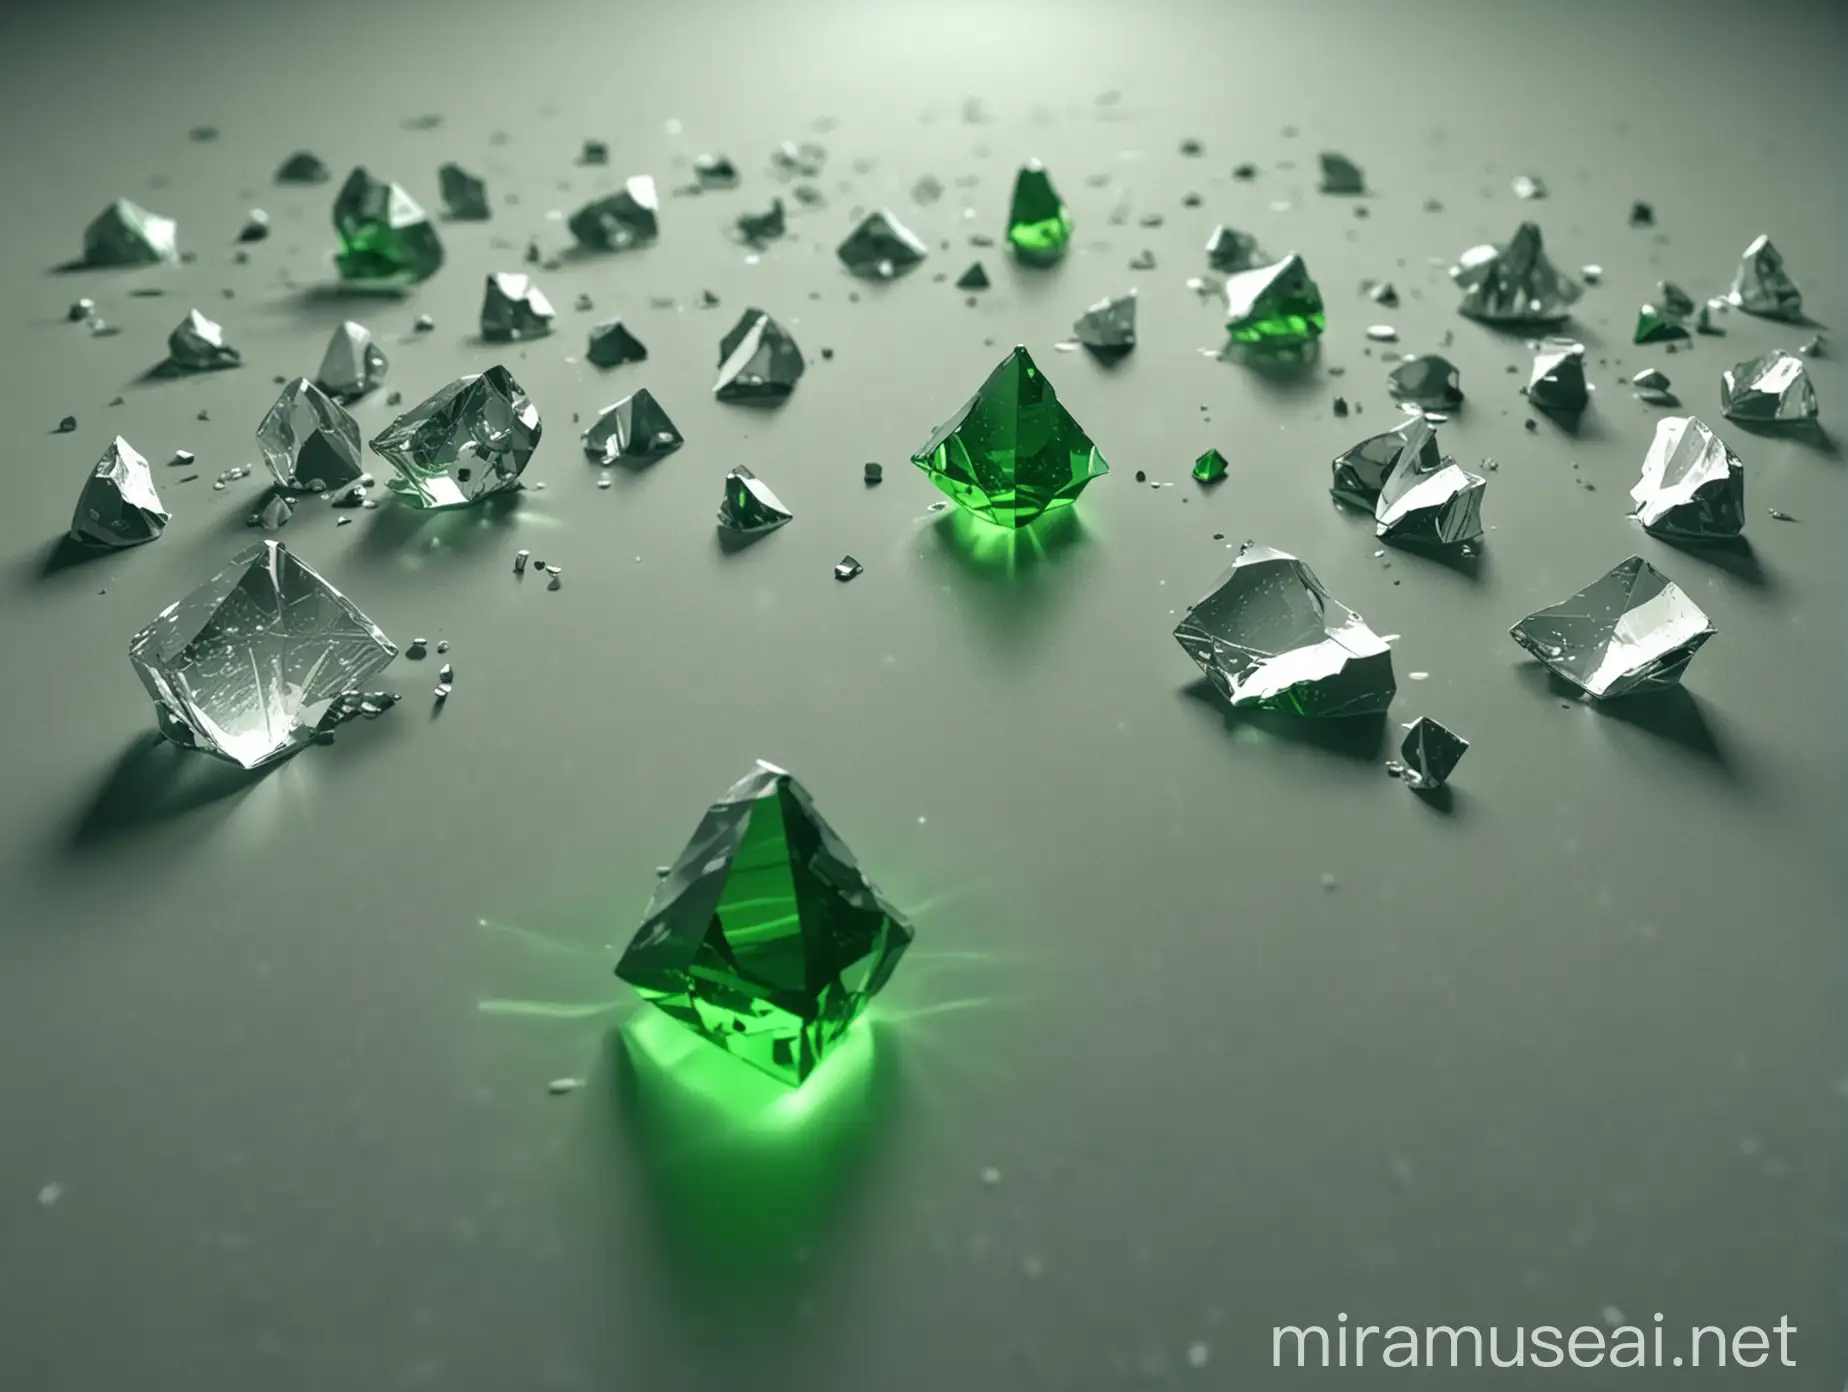 scientific sketch for many differently oriented small crystals on a surface 3D perspective, a parallel semi-transparent green beam falling onto on of the crystals from the top